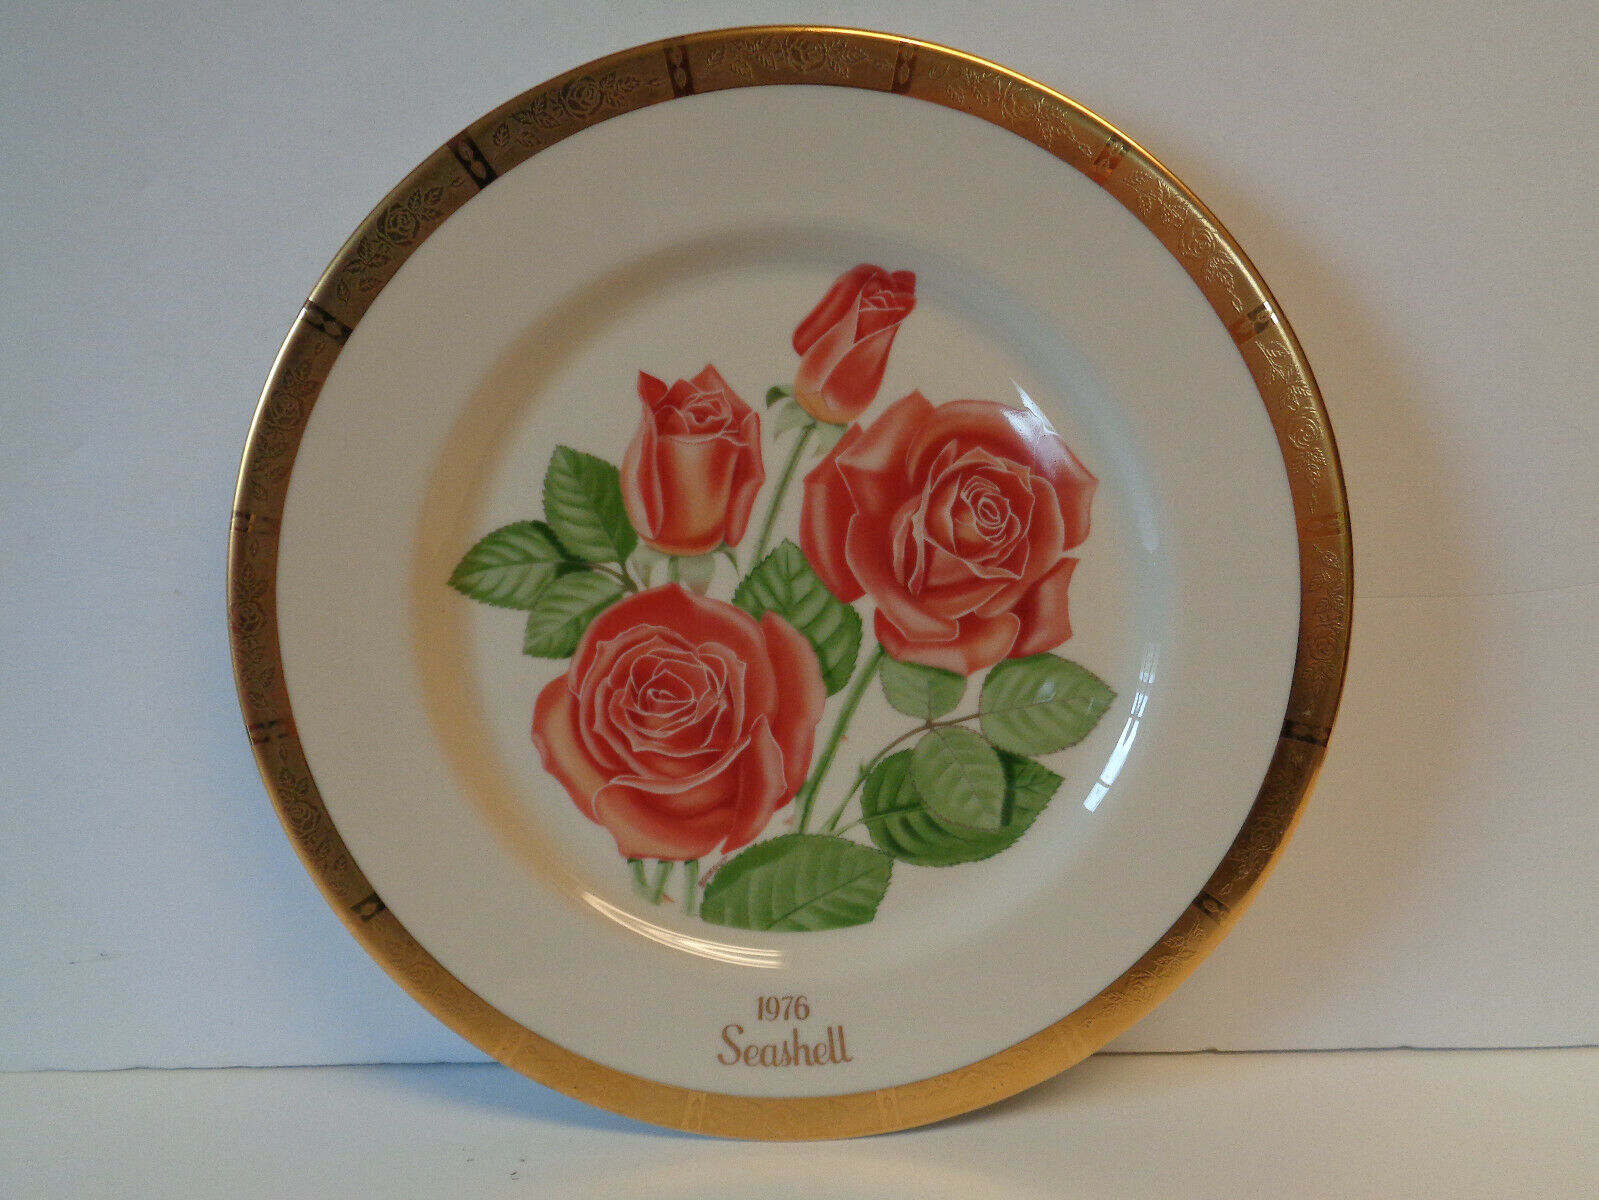 Gorham Seashell Collector Plate 1976 Limited Edition American Rose Society